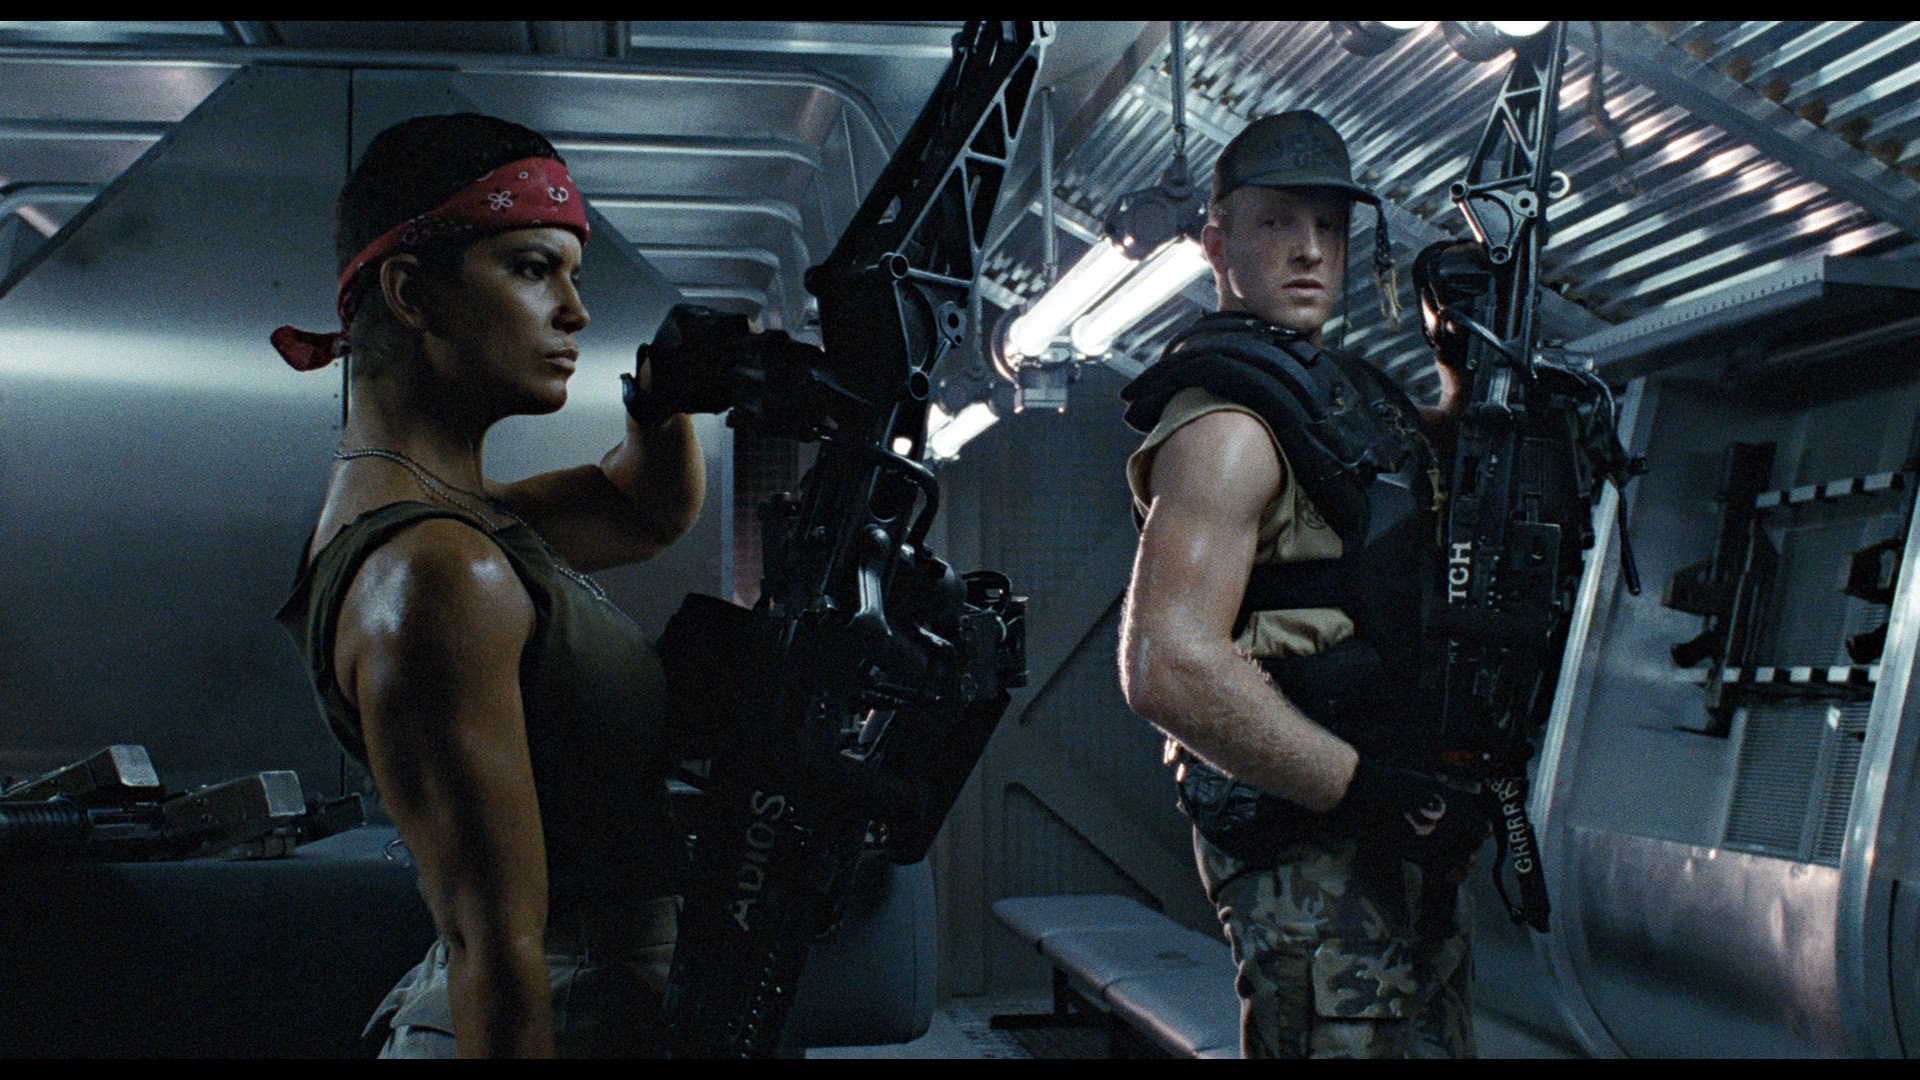 For those who are not familiar with a Steadicam rig, it is a system that was developed in the 70s to support and stabilize film cameras used in Hollywood. It was put front and center in James Cameron’s Aliens. The Colonial Marines M56 Smartgun was a modified MG42 mounted onto a Steadicam third arm. 'Dressing' on the MG42 was constructed from various motorcycle parts, most notably the handlebars from a 1976 Husqvarna ("Husky") Magura 360 used for the linkage to the weapon's actual trigger (actually a brake lever mounted in a clutch perch) and grips, a 1981 Kawasaki KZ750 control panel used for the front controls, and the footpegs from a Kawasaki AR-125 used to decorate the barrel shroud. The weapon is paired with a special sighting system worn on the operator's head. This was inspired by the FLIR eyepieces mounted on the helmets of US AH-64 Apache pilots.